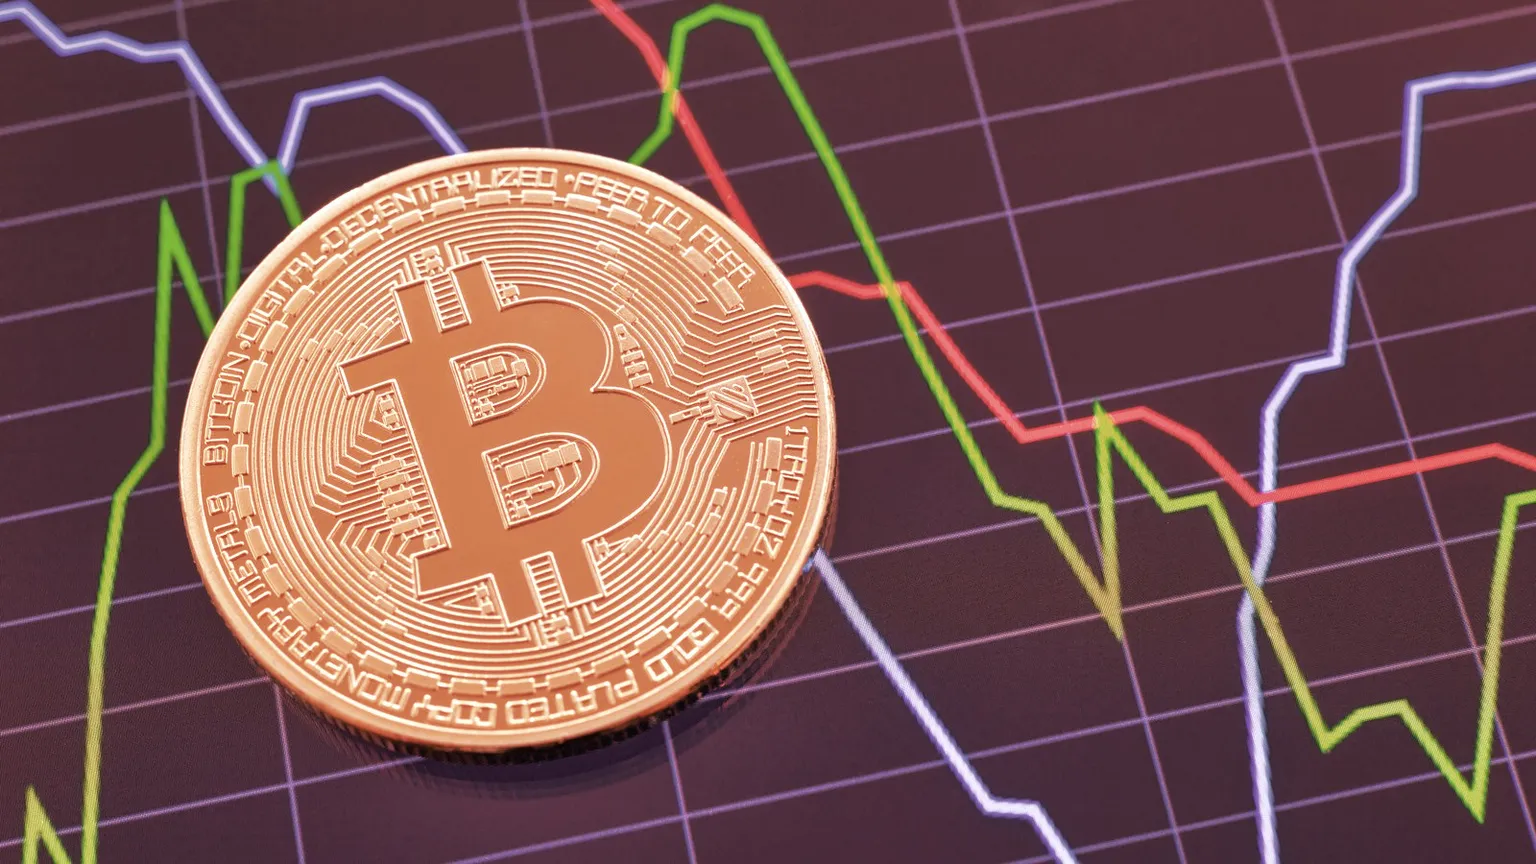 Bitcoin has been stuck in the red all year, struggling to stay on the upswing. Image: Shutterstock